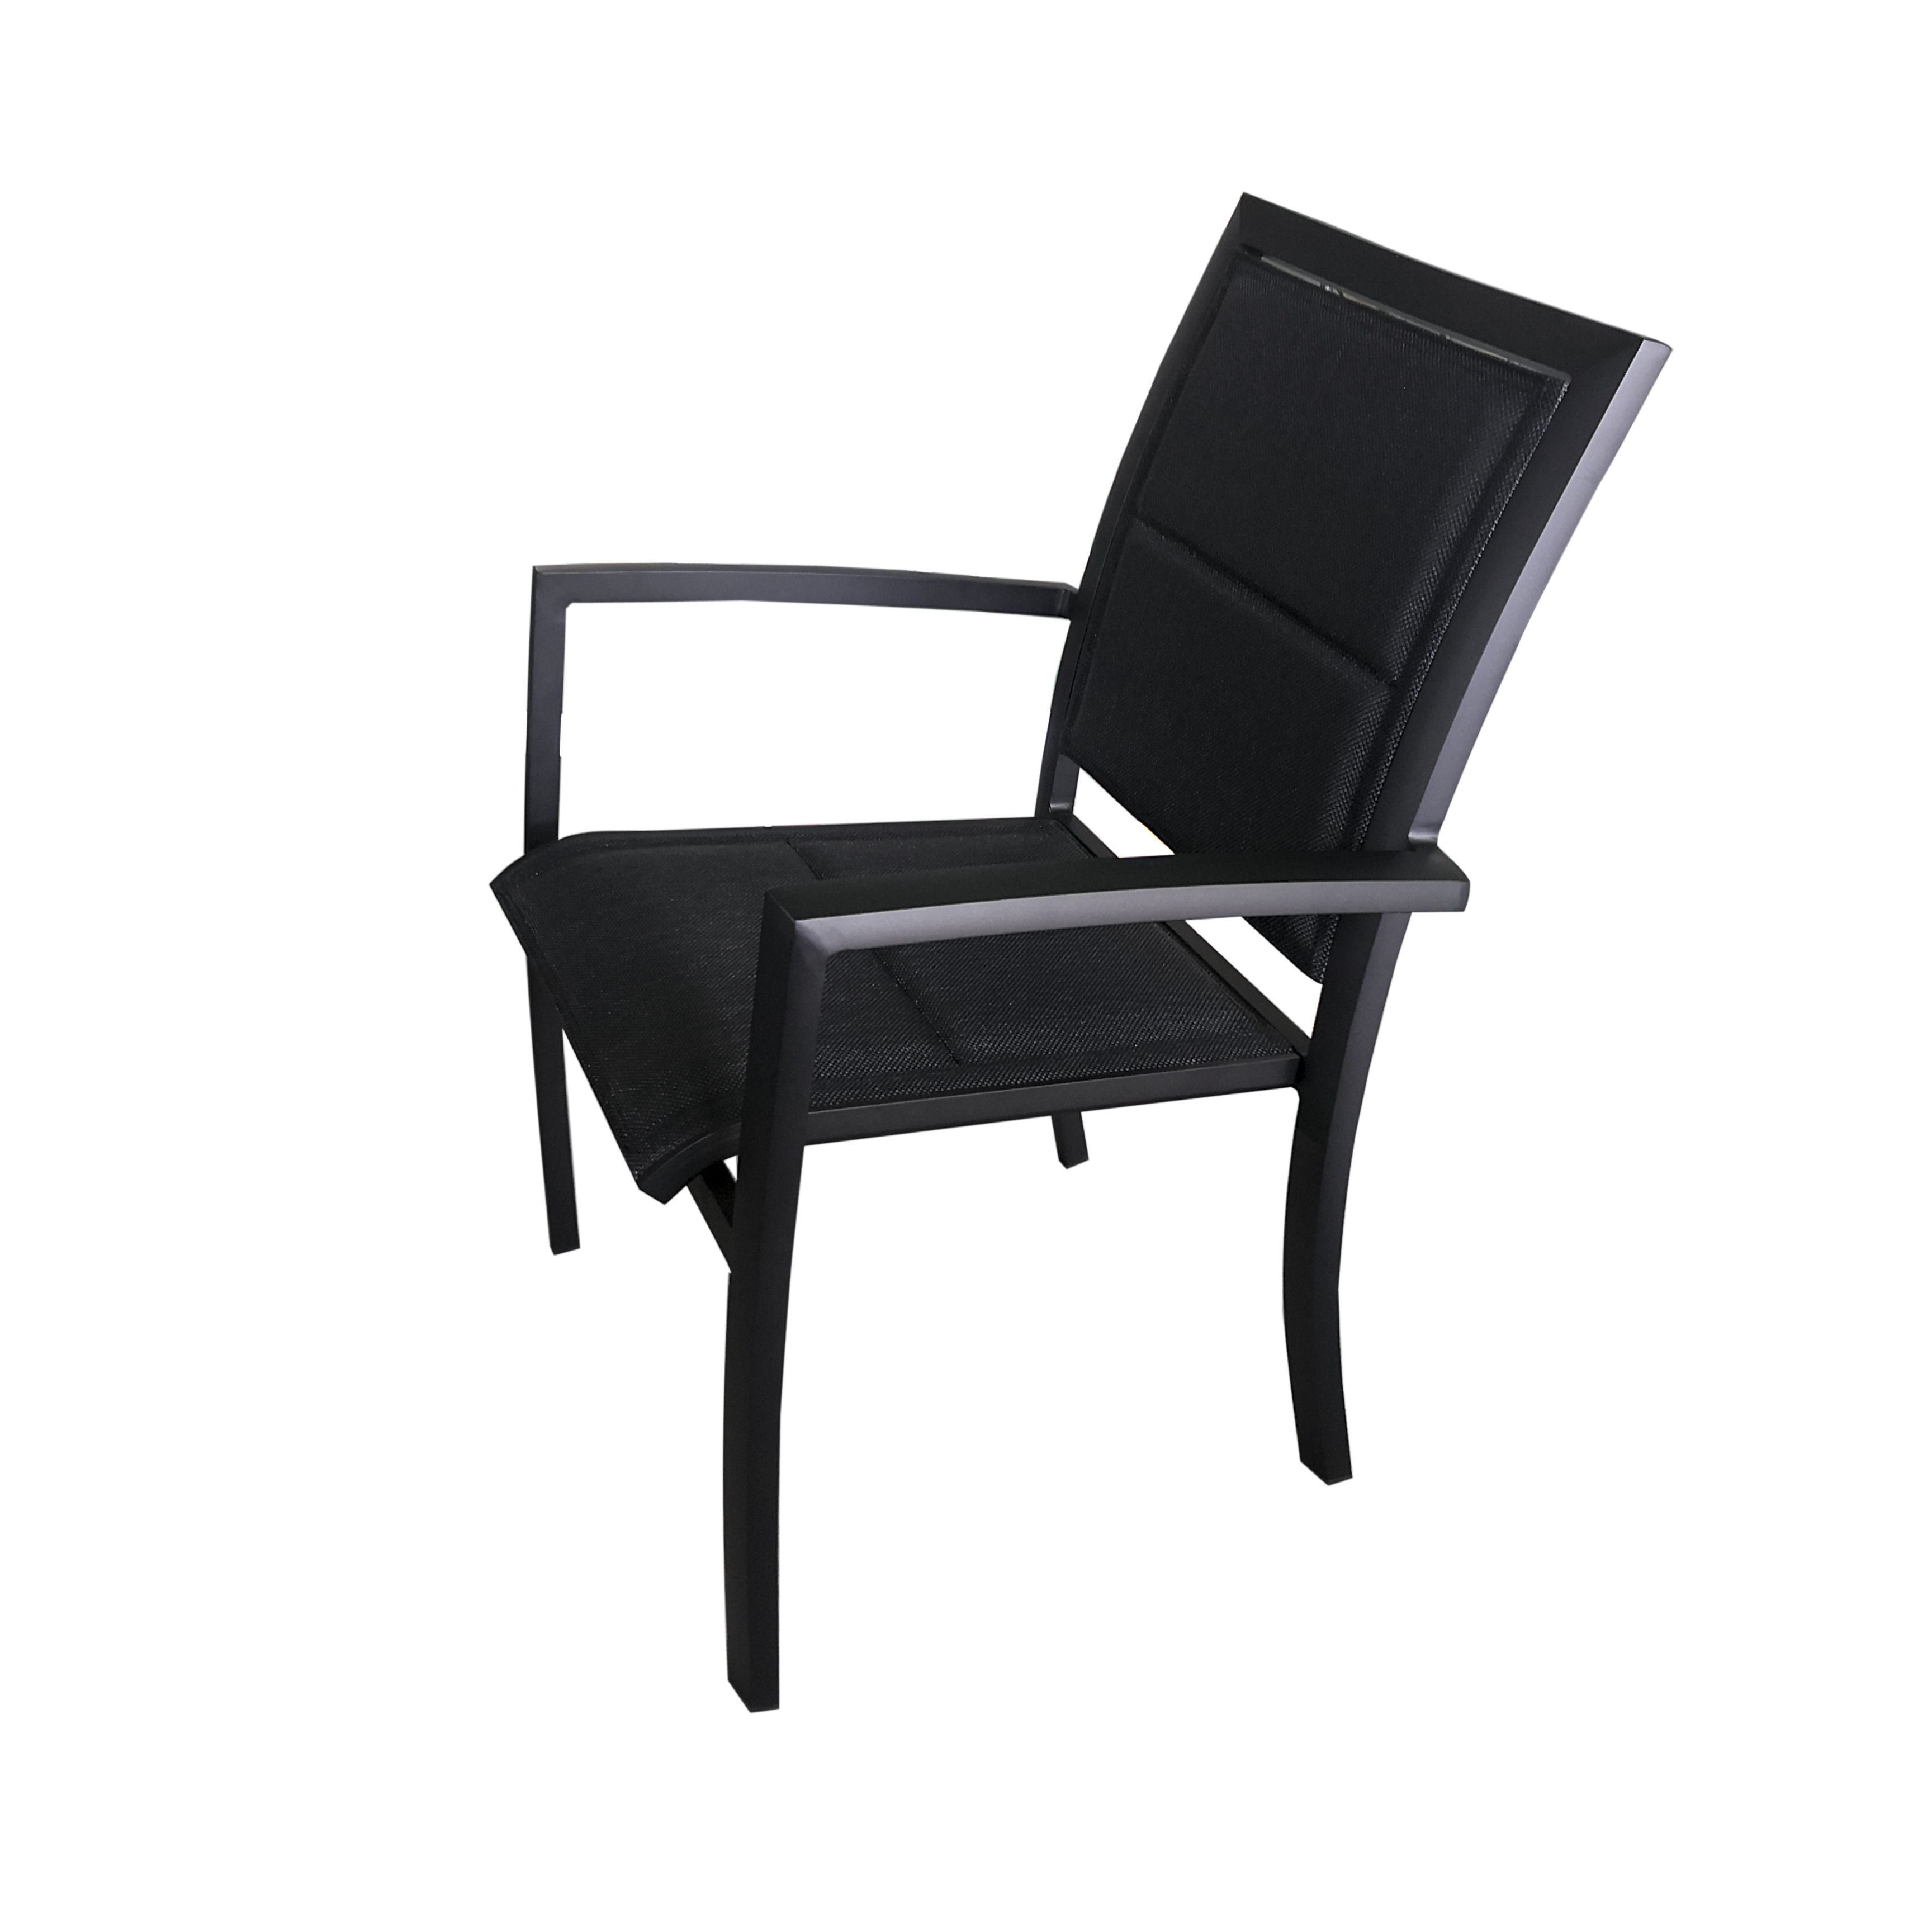 MOSS MOSS-T316NN - Akumal Collection, Black matte aluminum stackable chair with quick dry padded black textilene seat 24" x 31" x H 36"